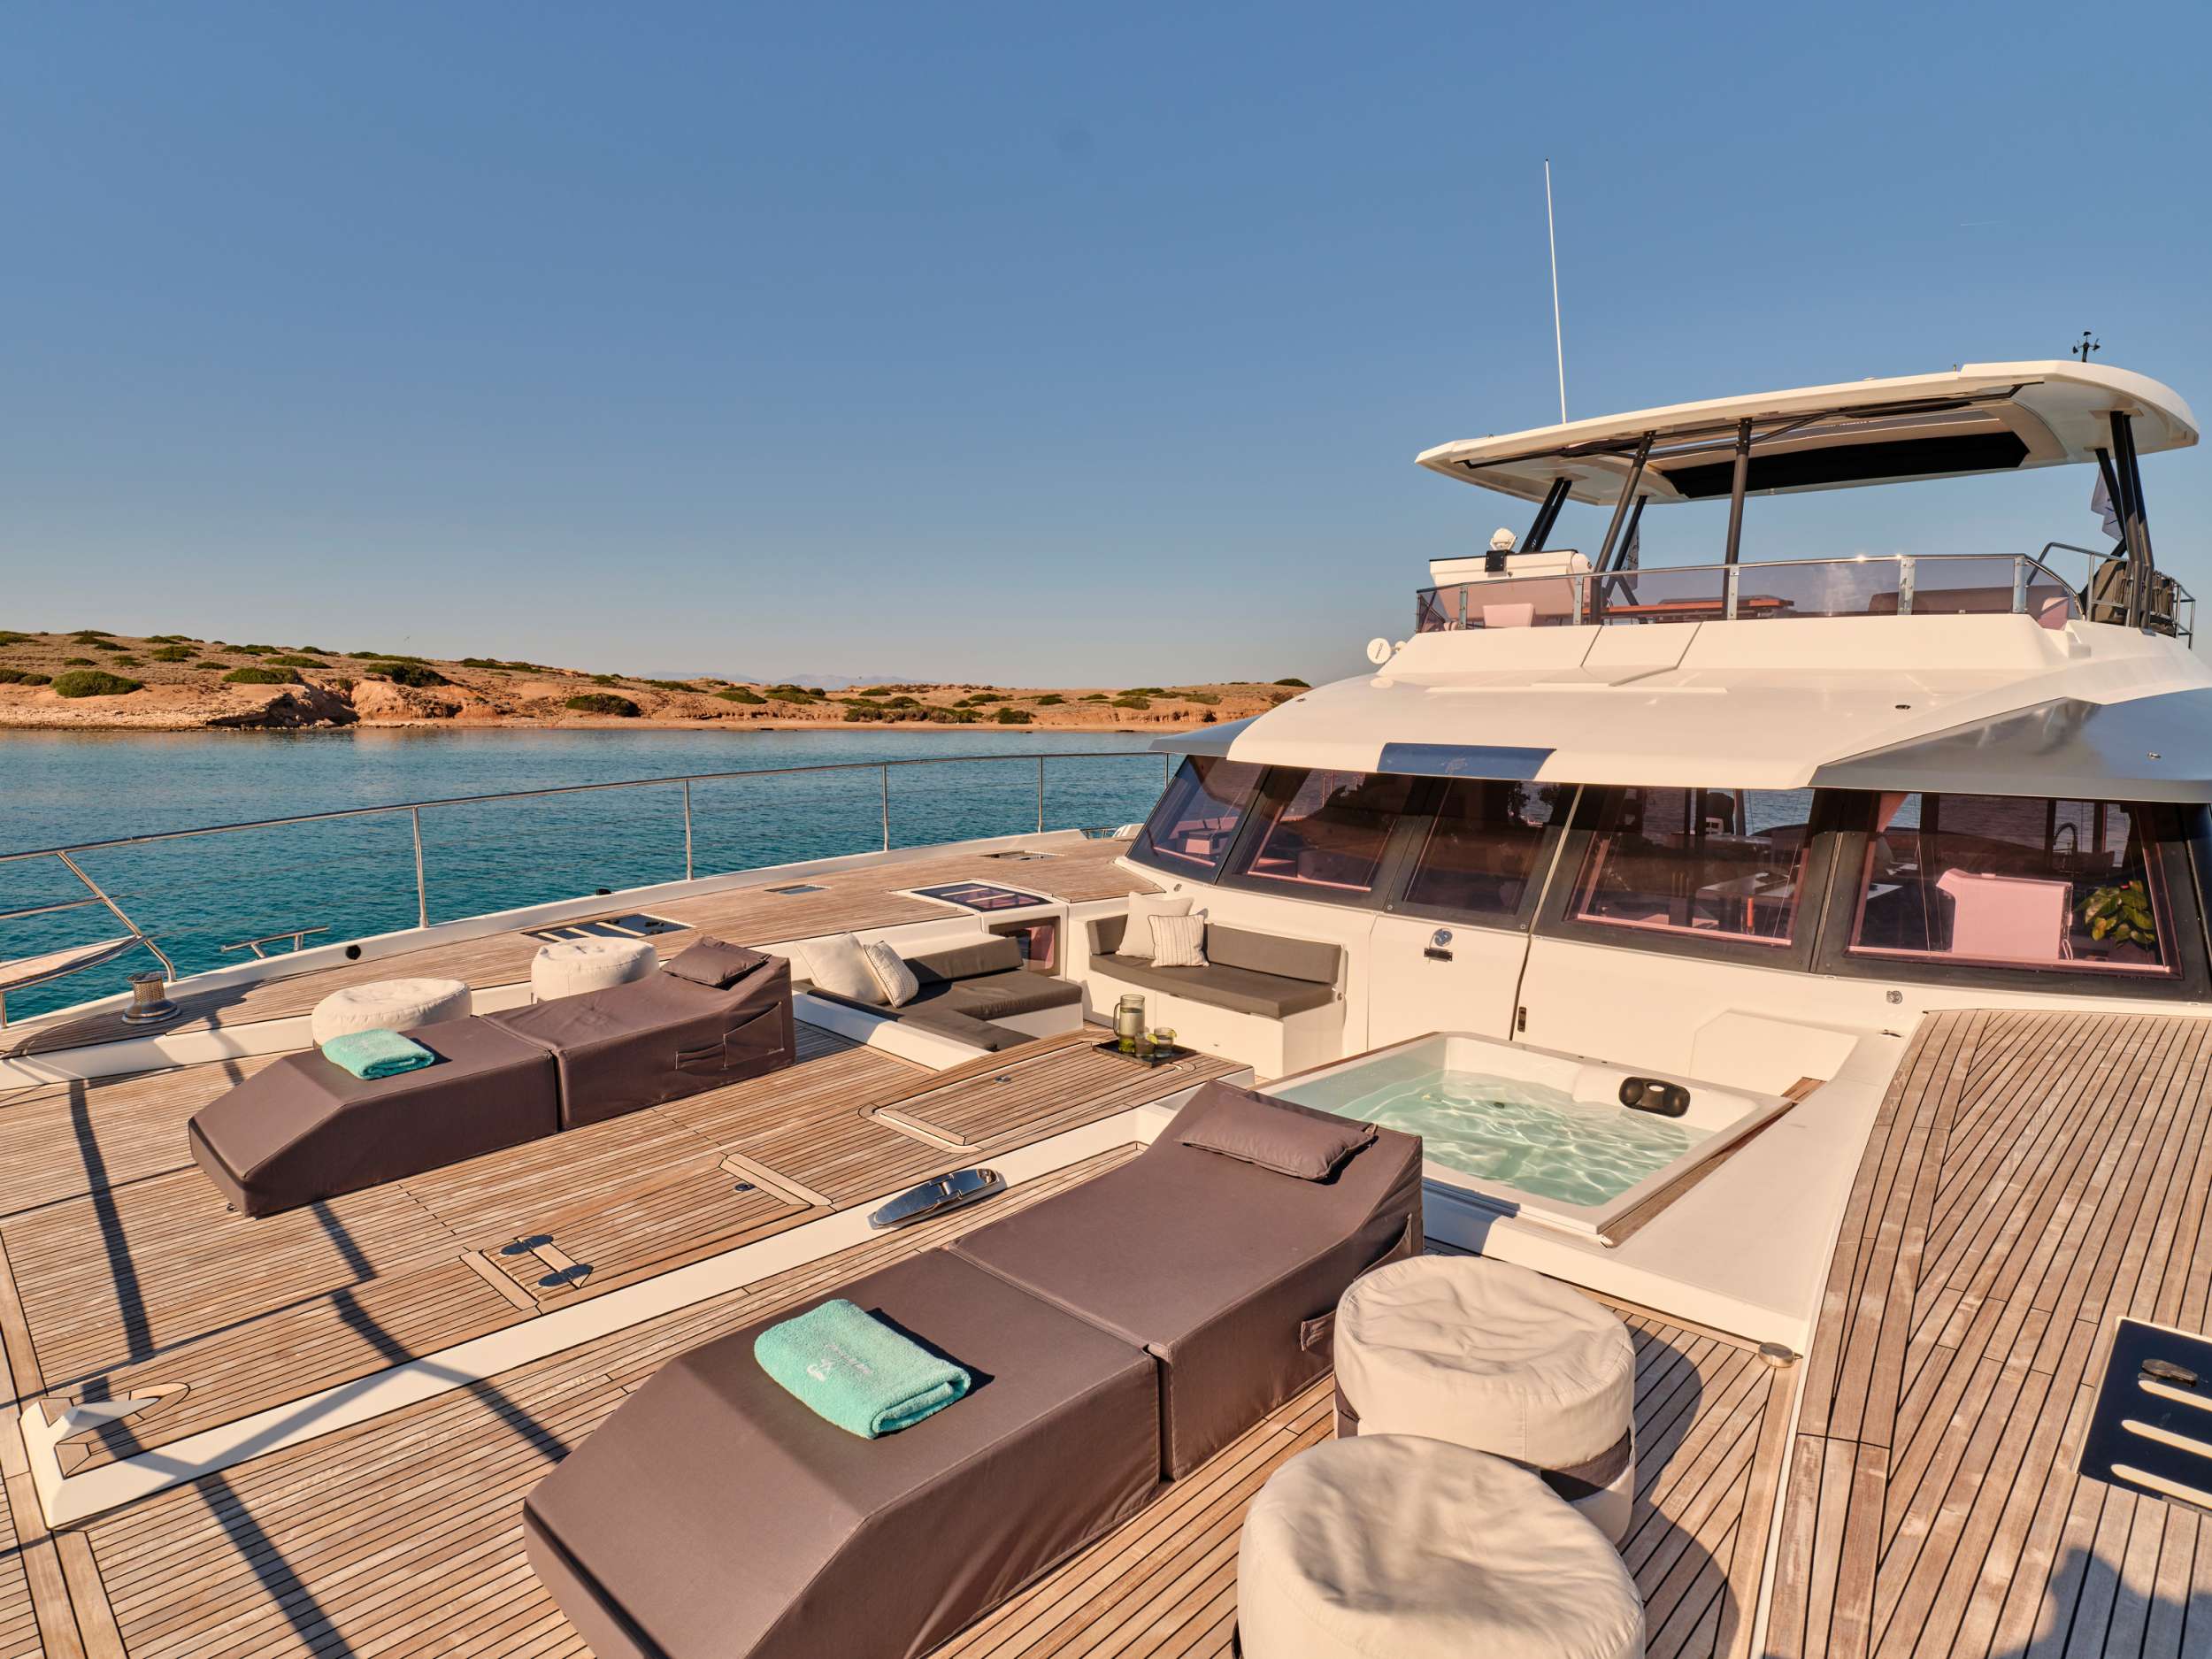 Foredeck lounge and jacuzzi